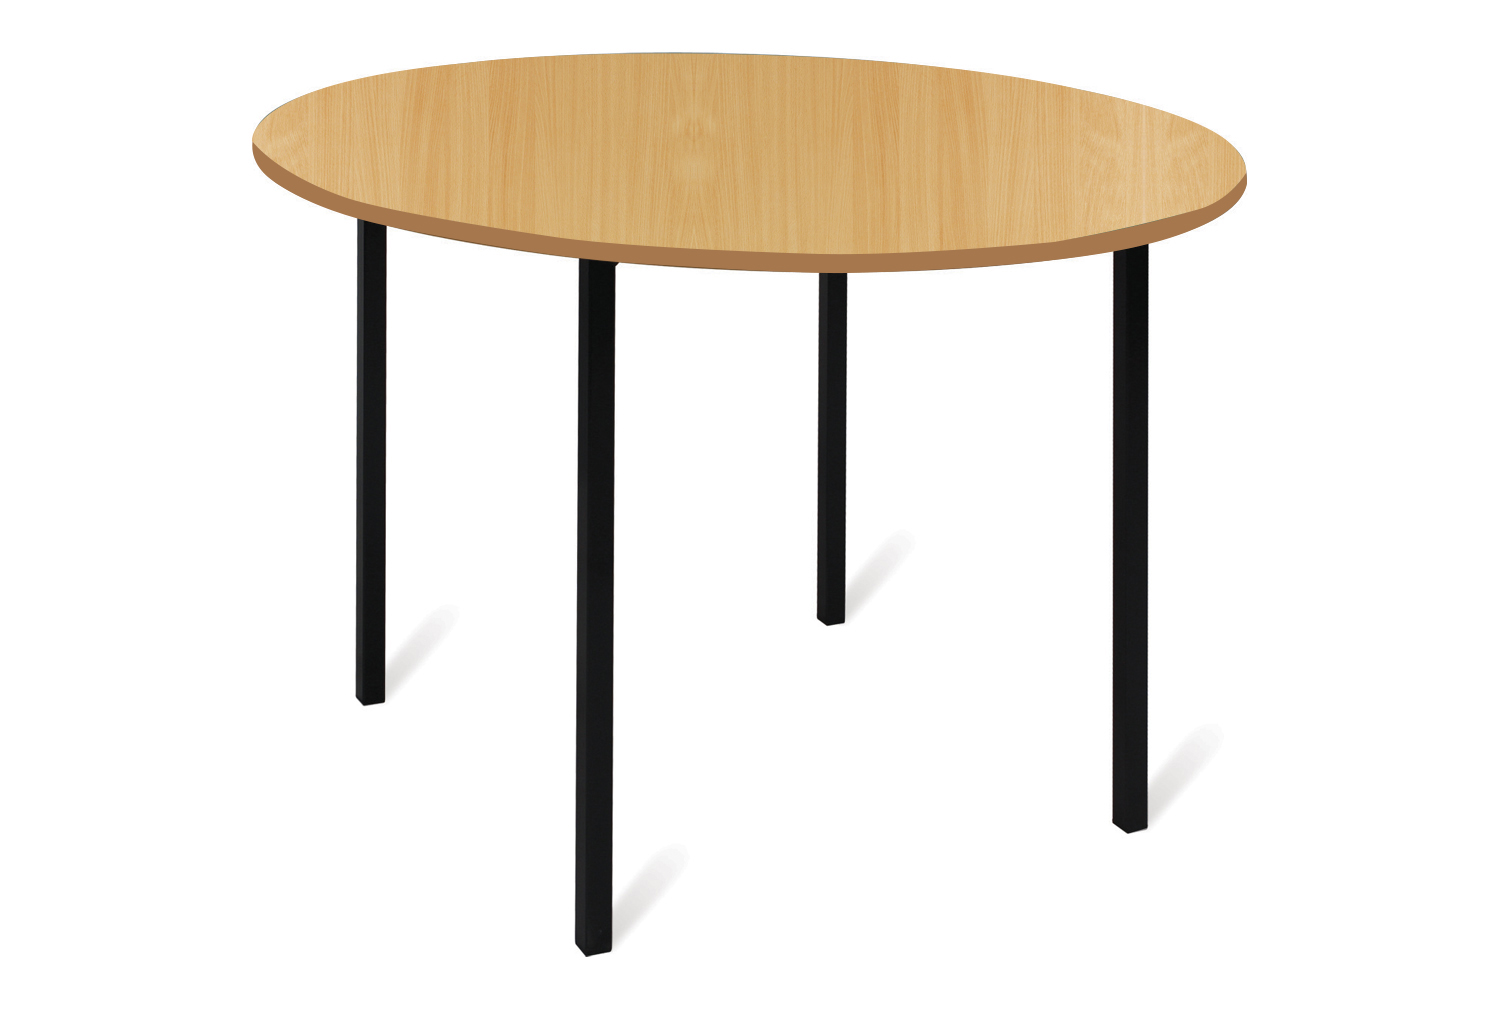 Qty 4 - Educate Fully Welded Circular Classroom Tables 11-14 Years (MDF Edge), 100diax71h (cm), Charcoal Frame, Beech Top